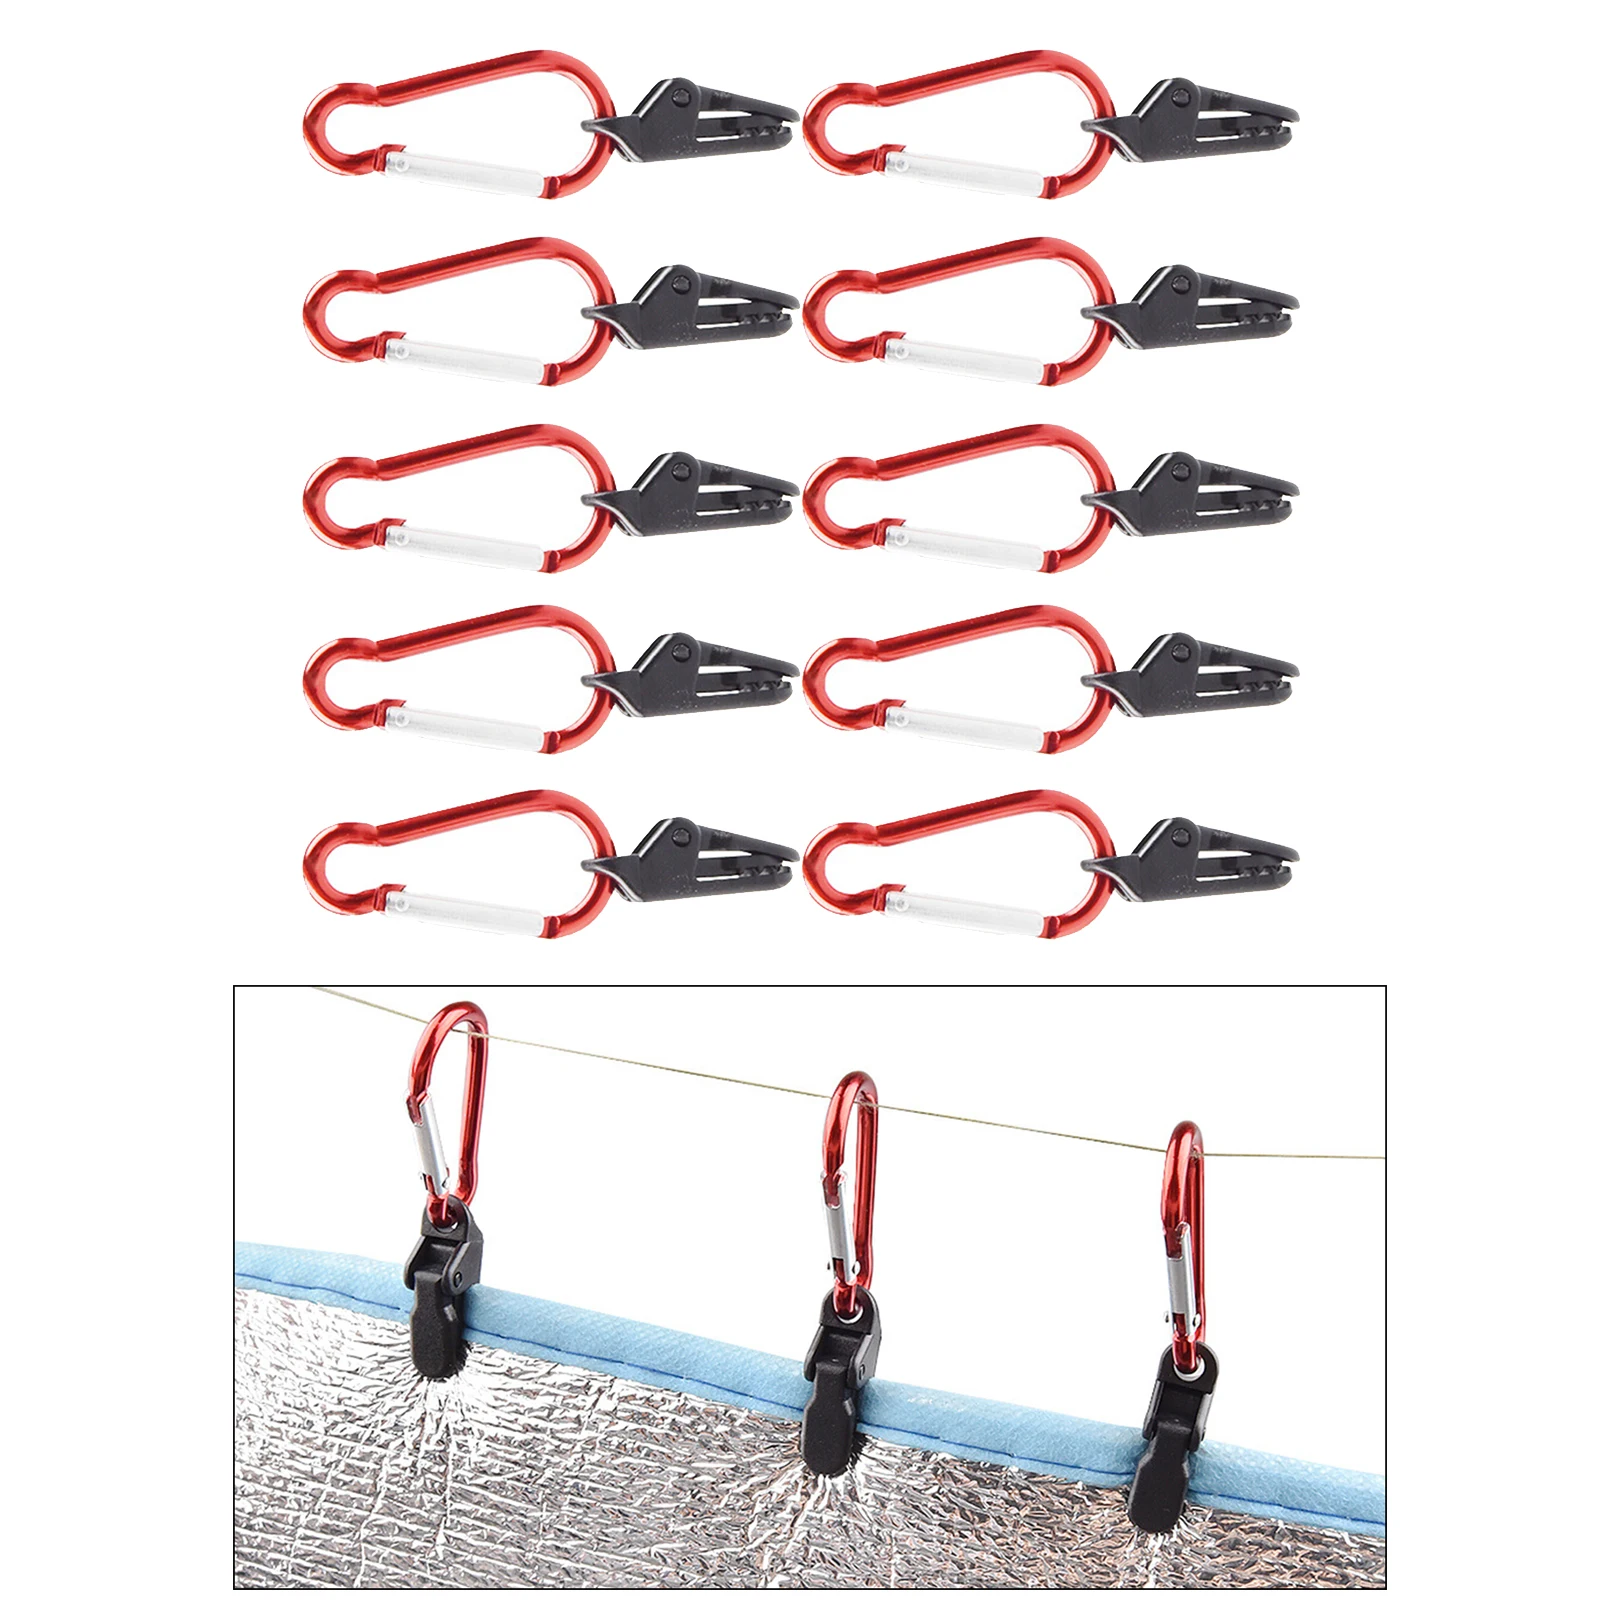 10x Tent Tarp Clips Canopies Clamps Camping Canopy Carabiner Awnings Clip